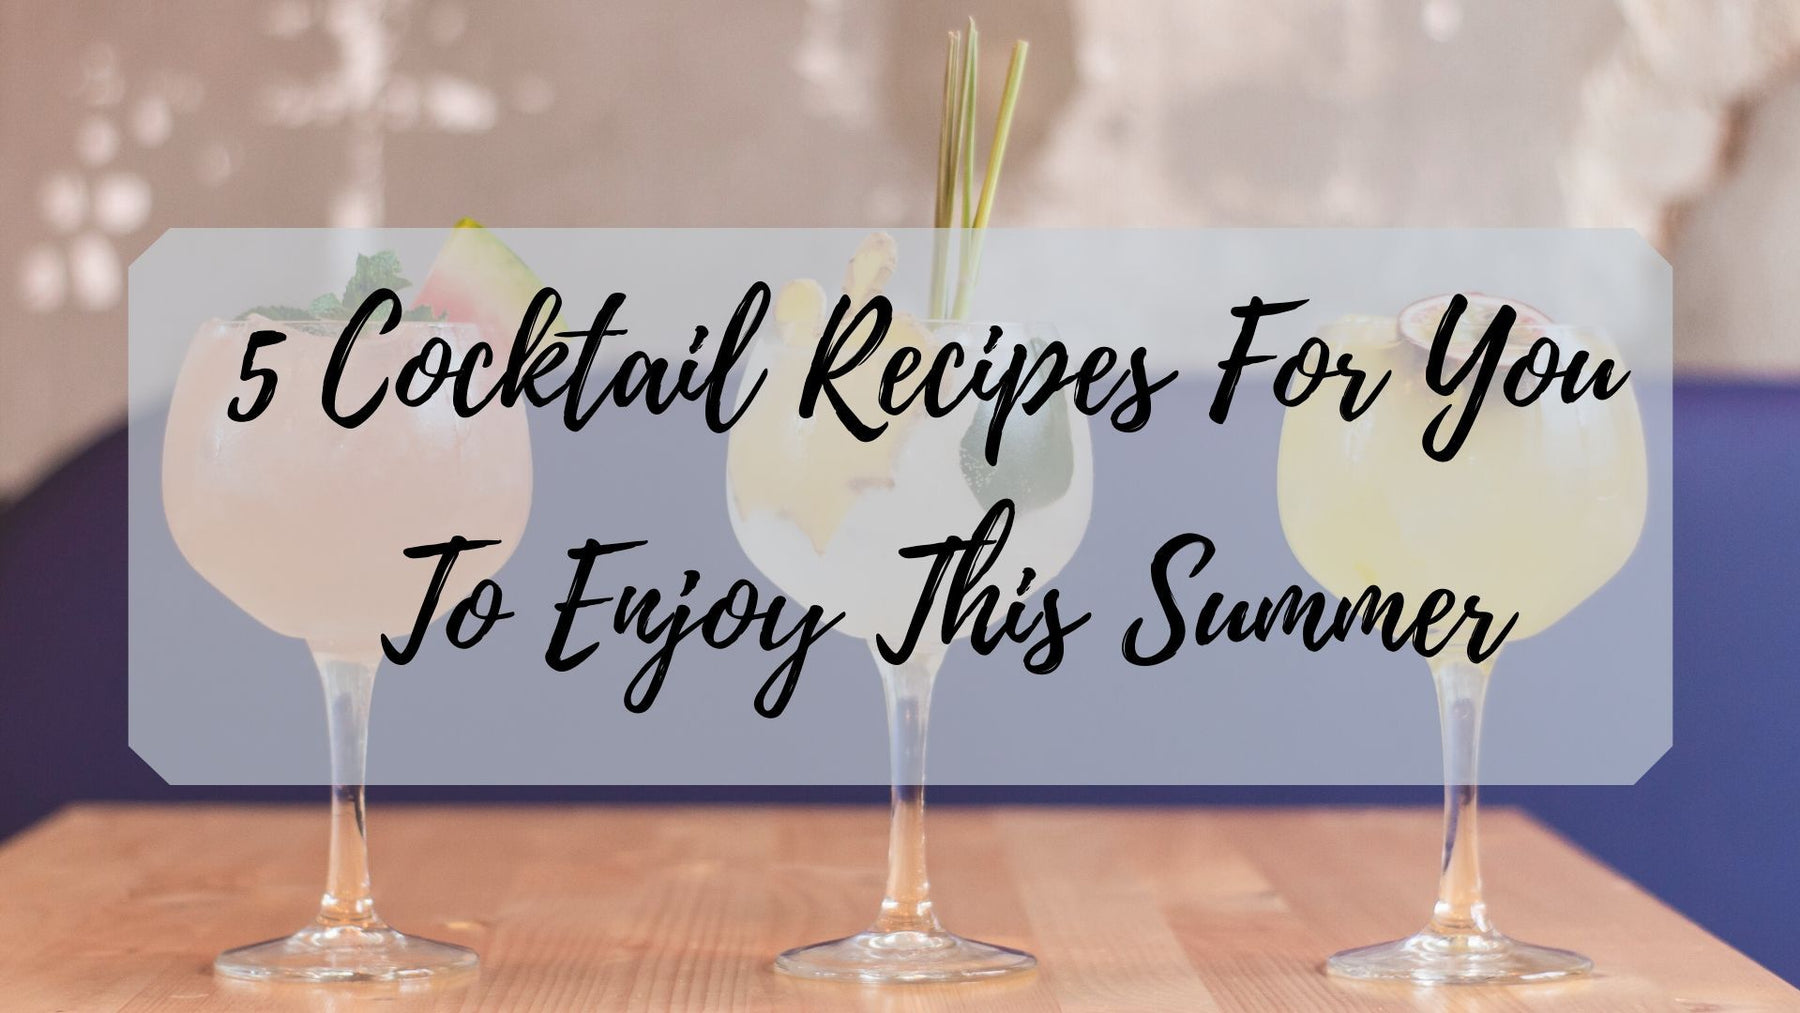 Text - 5 Cocktail Recipes For You To Enjoy This Summer